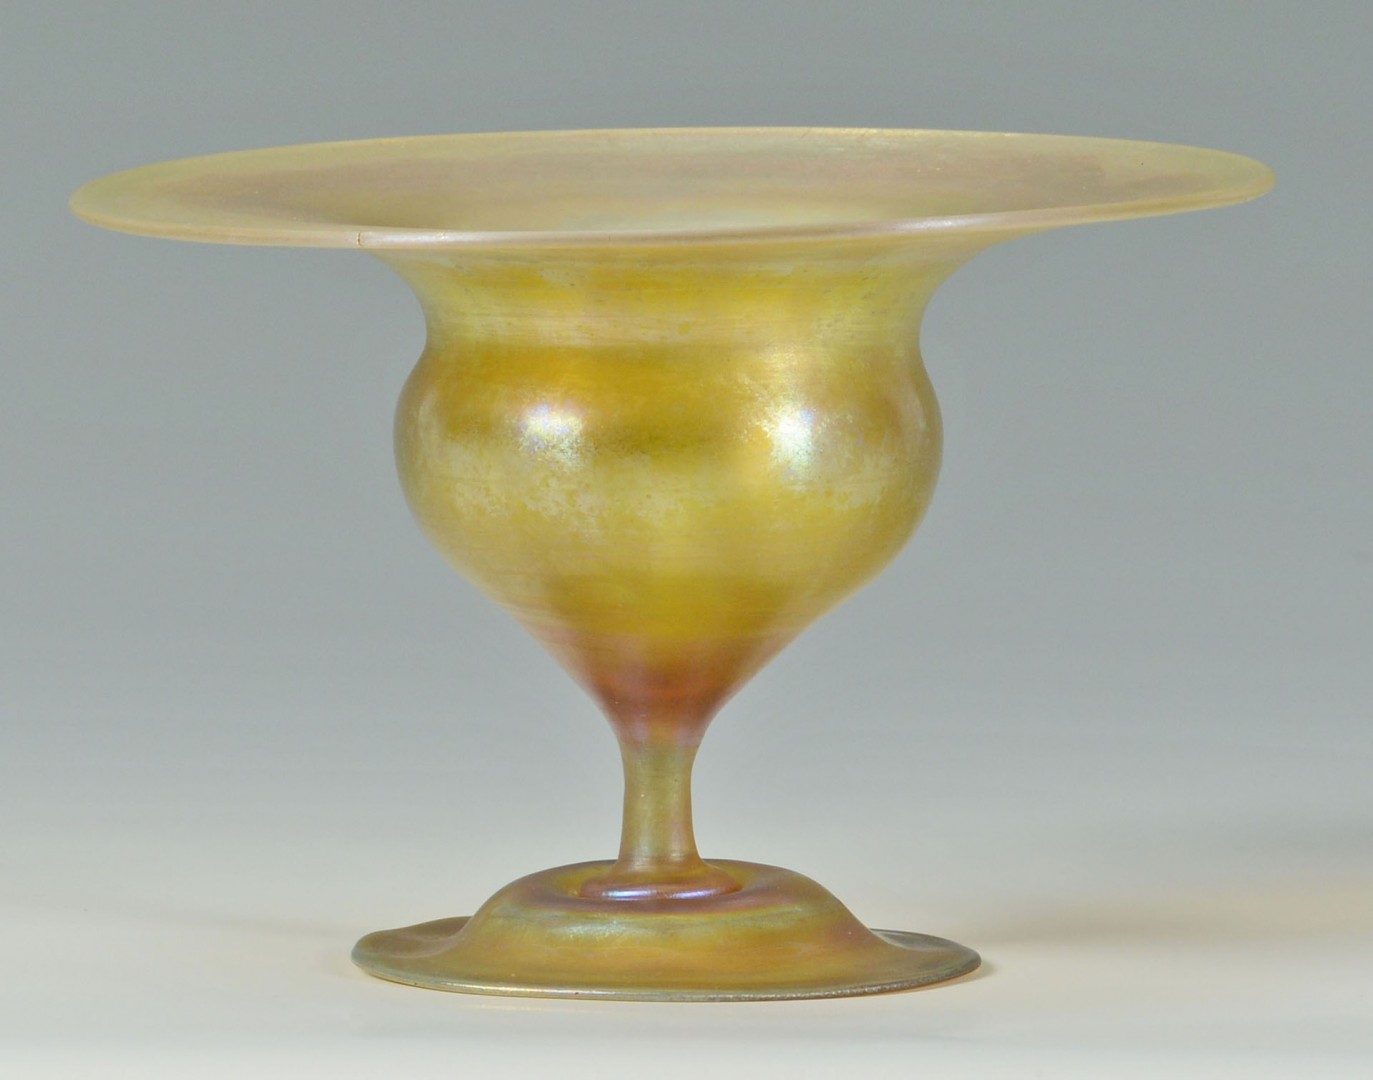 Lot 162: Signed Tiffany Favrile Glass Compote